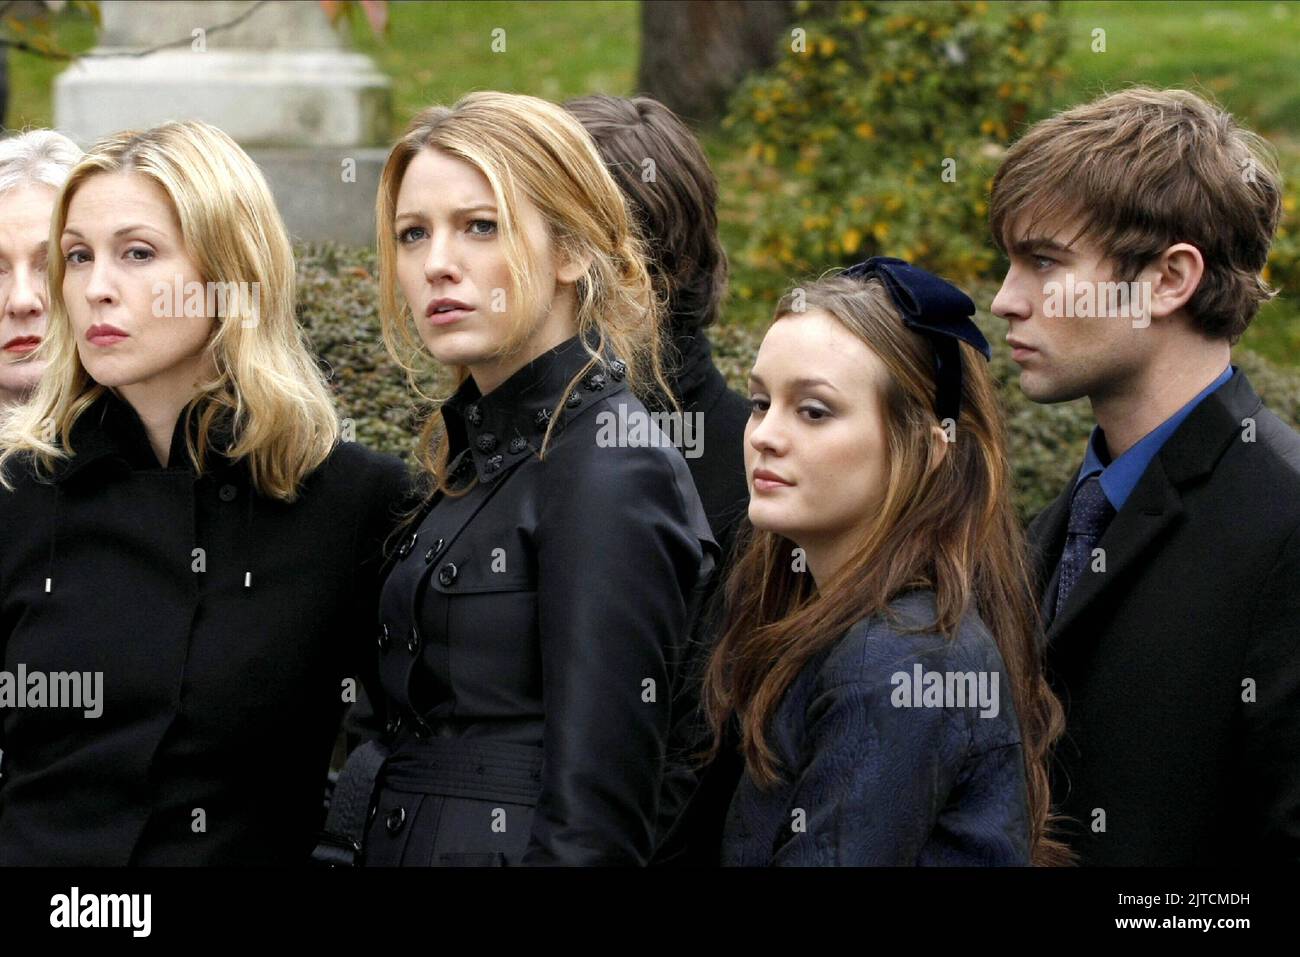 KELLY RUTHERFORD, BLAKE LIVELY, LEIGHTON MEESTER, CHACE CRAWFORD, GOSSIP GIRL, 2007 Stock Photo